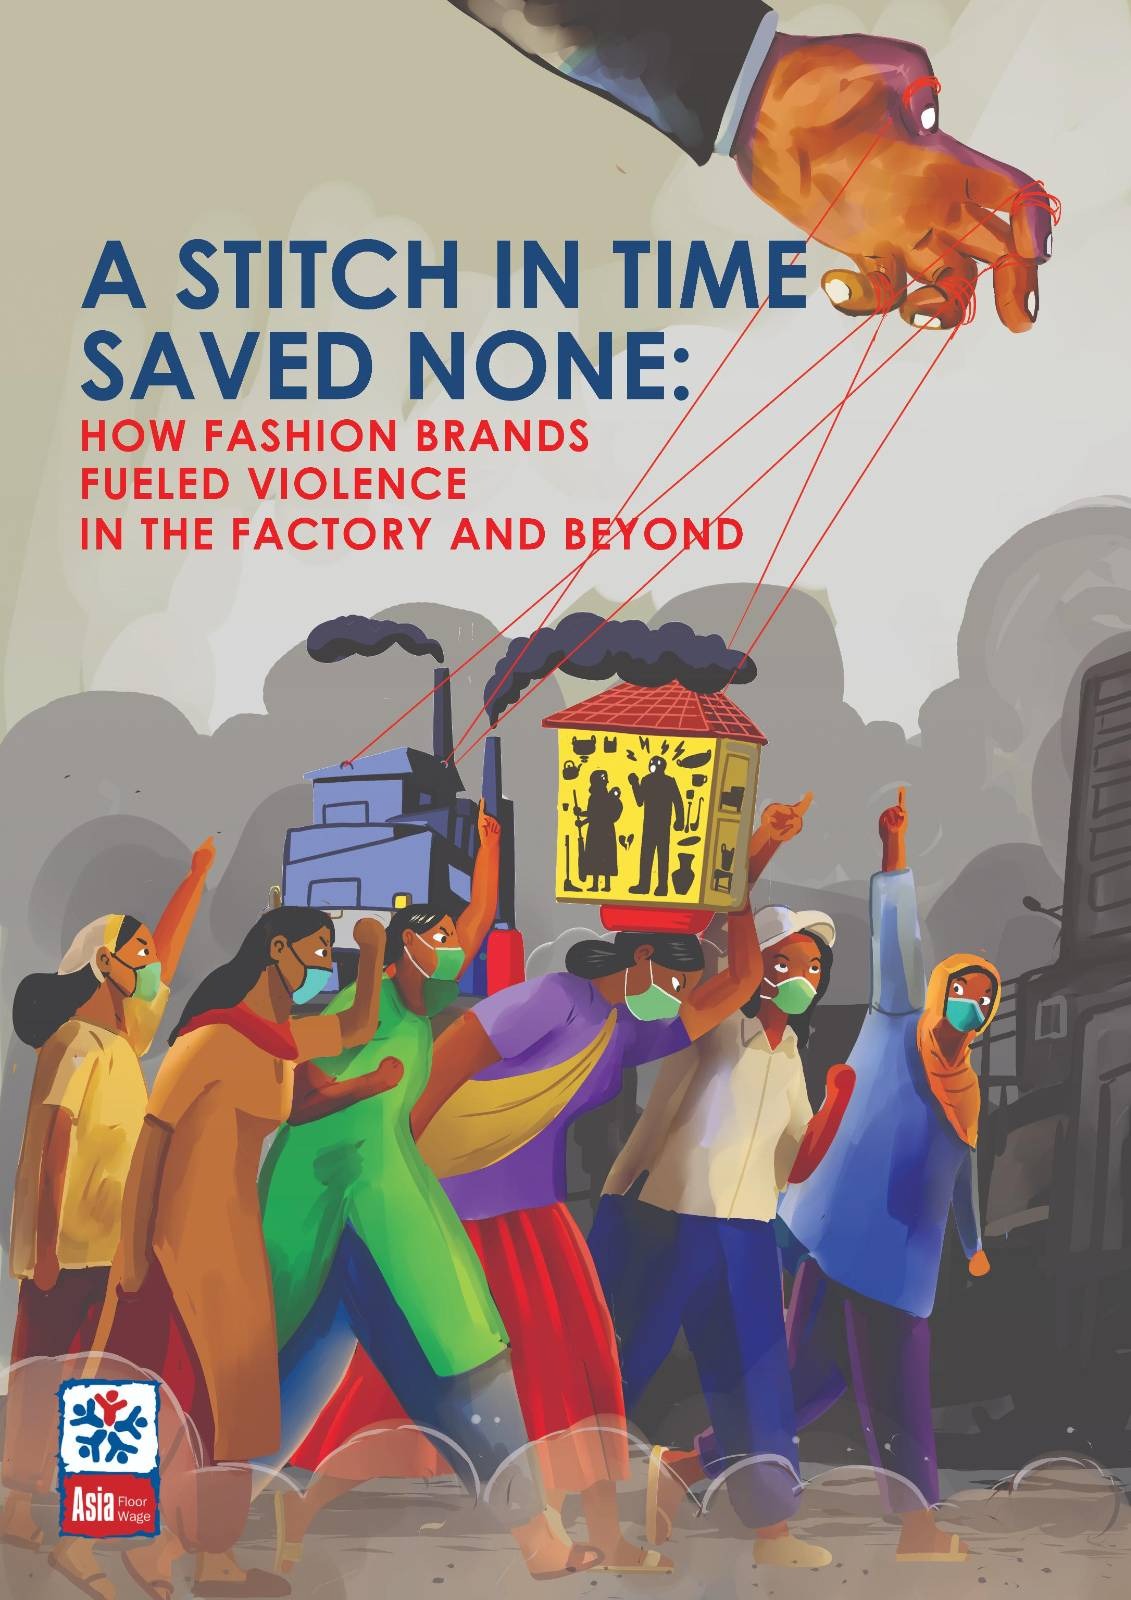 A Stitch in Time Saved None: How Fashion Brands Fueled Violence Beyond the  Factory – Asia Floor Wage Alliance